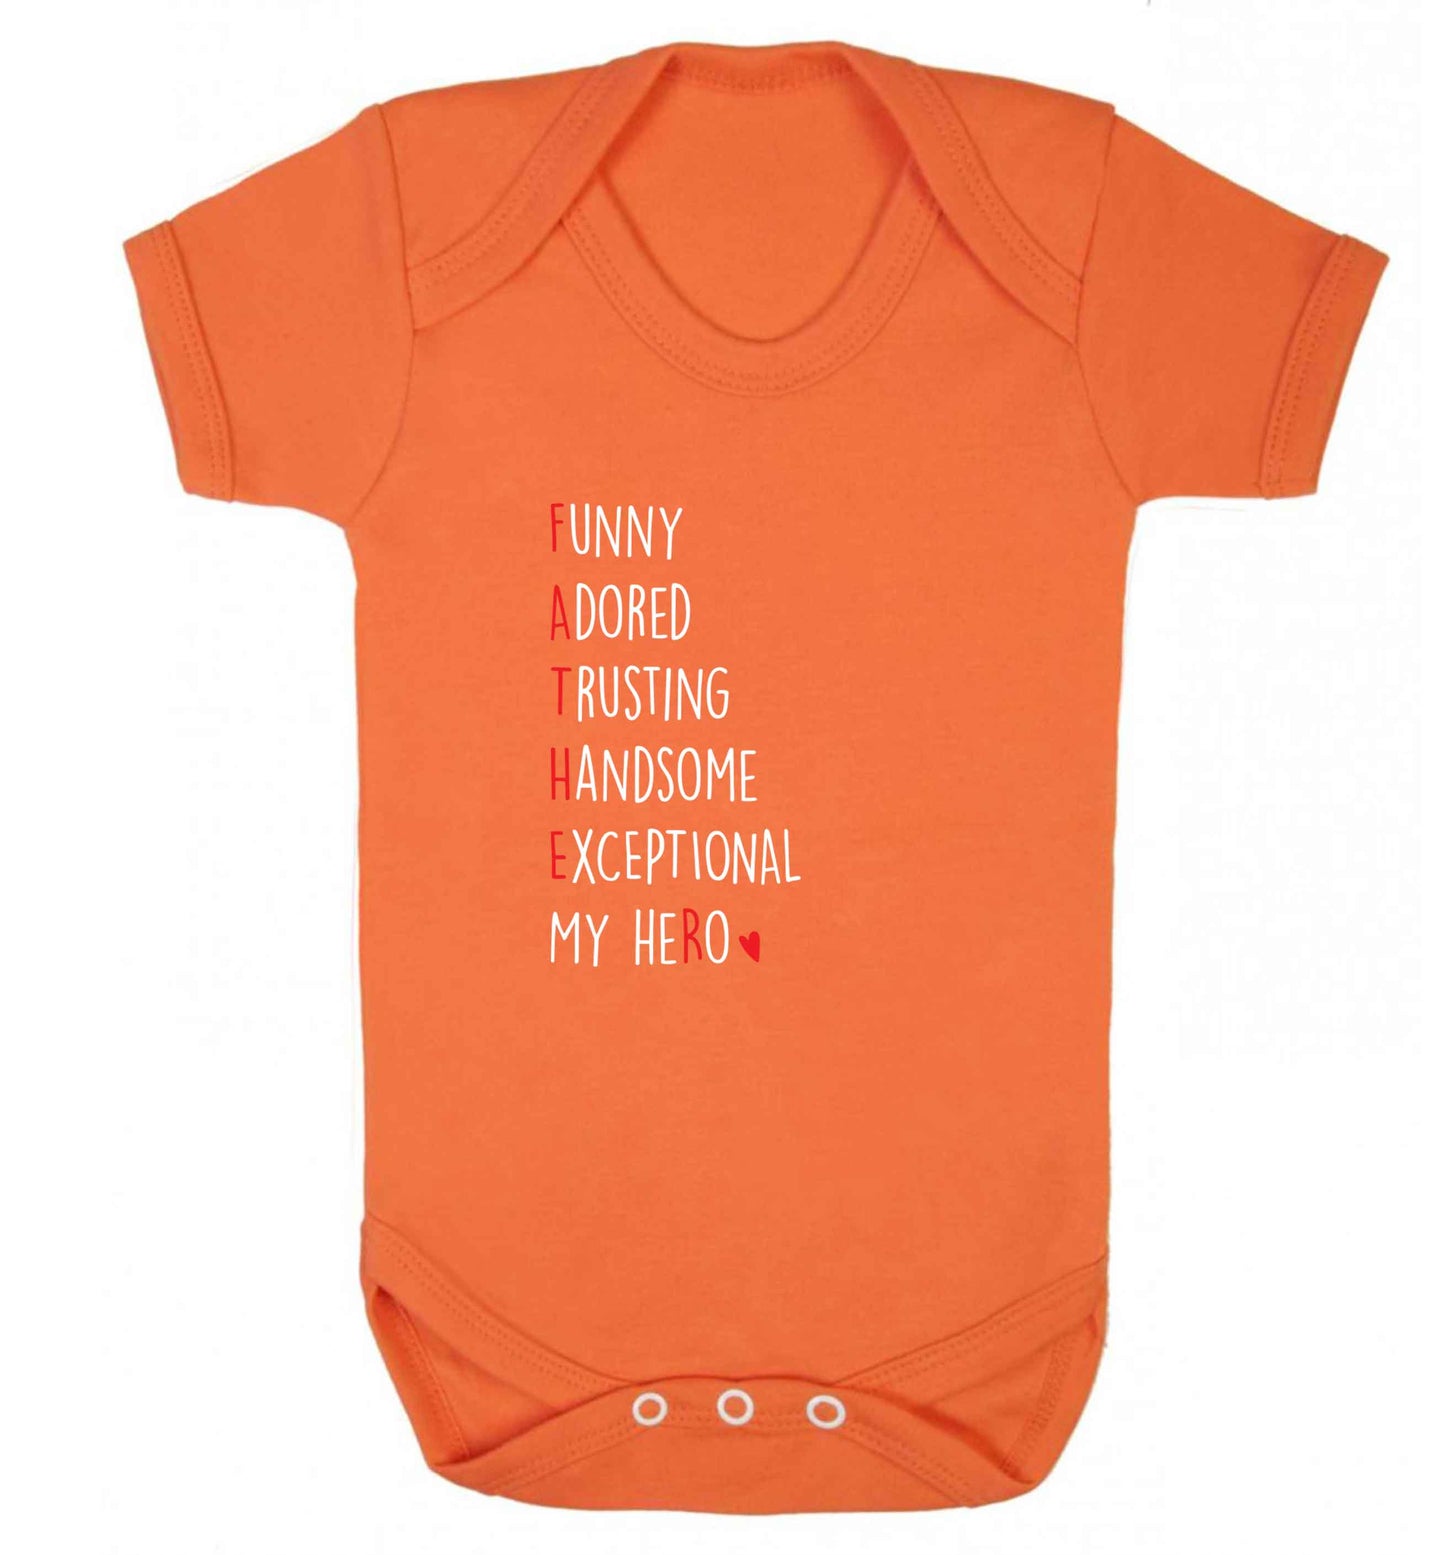 Father, funny adored trusting handsome exceptional my hero baby vest orange 18-24 months